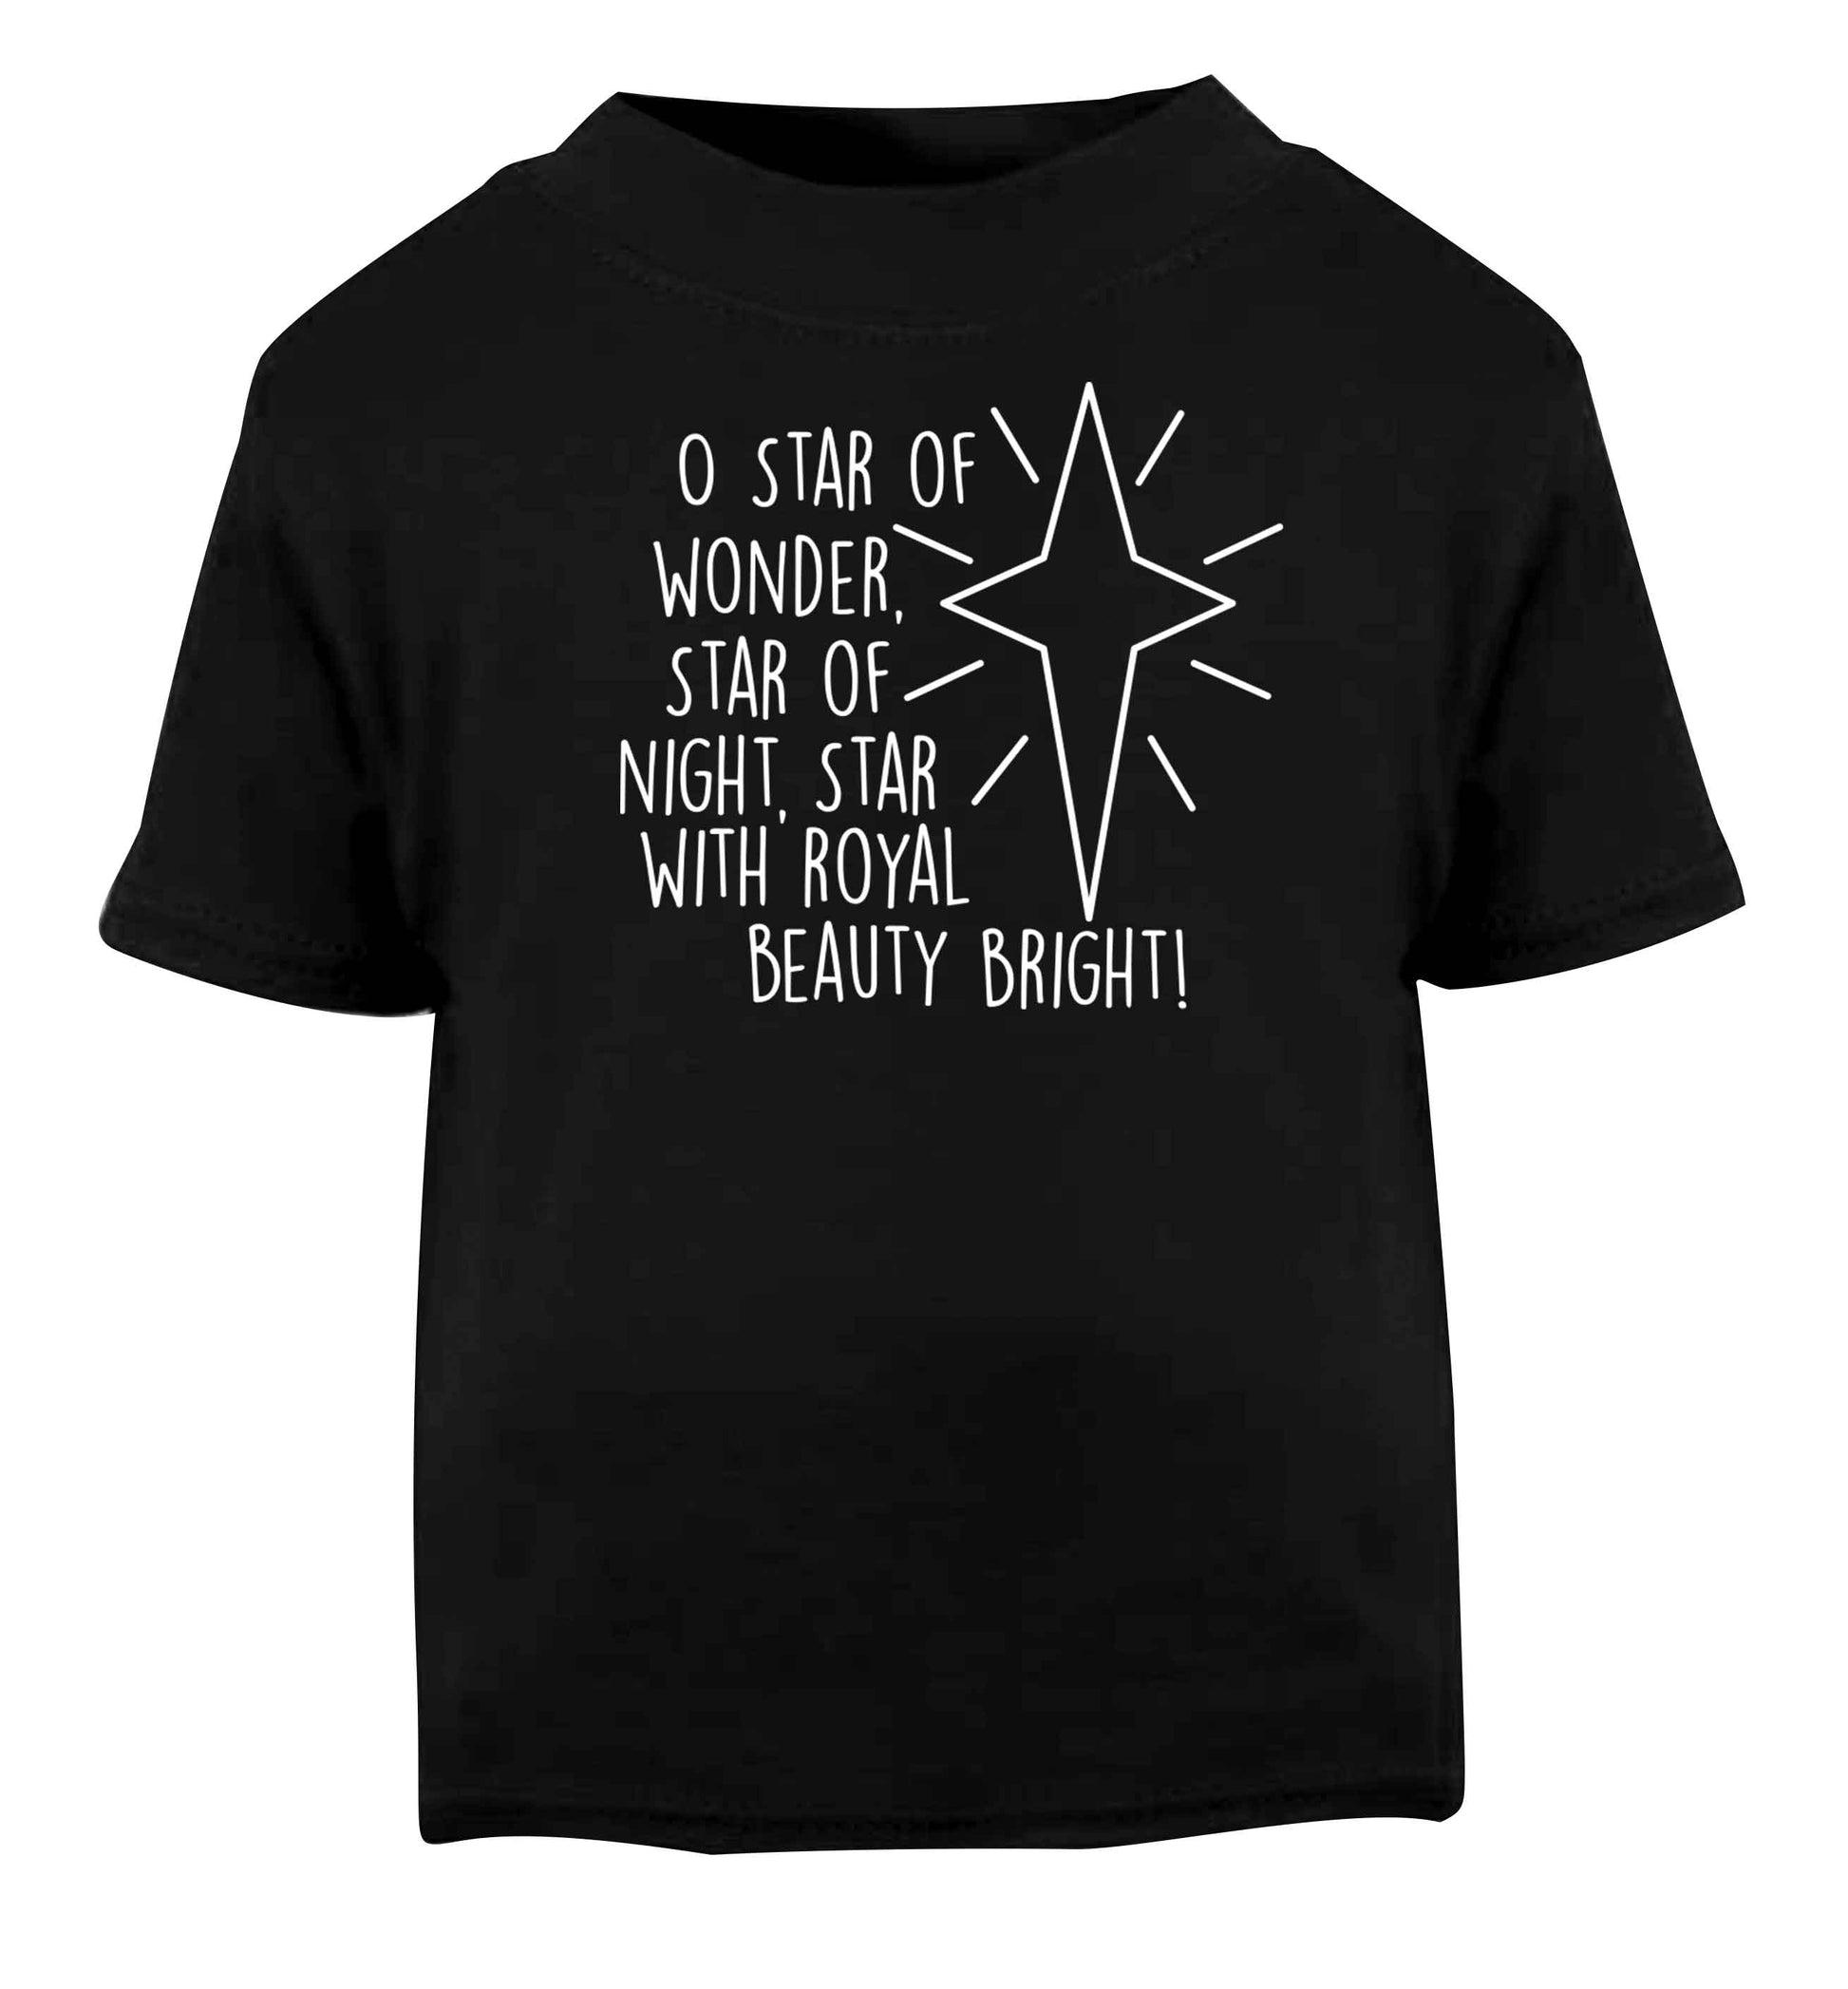 Oh star of wonder star of night, star with royal beauty bright Black baby toddler Tshirt 2 years